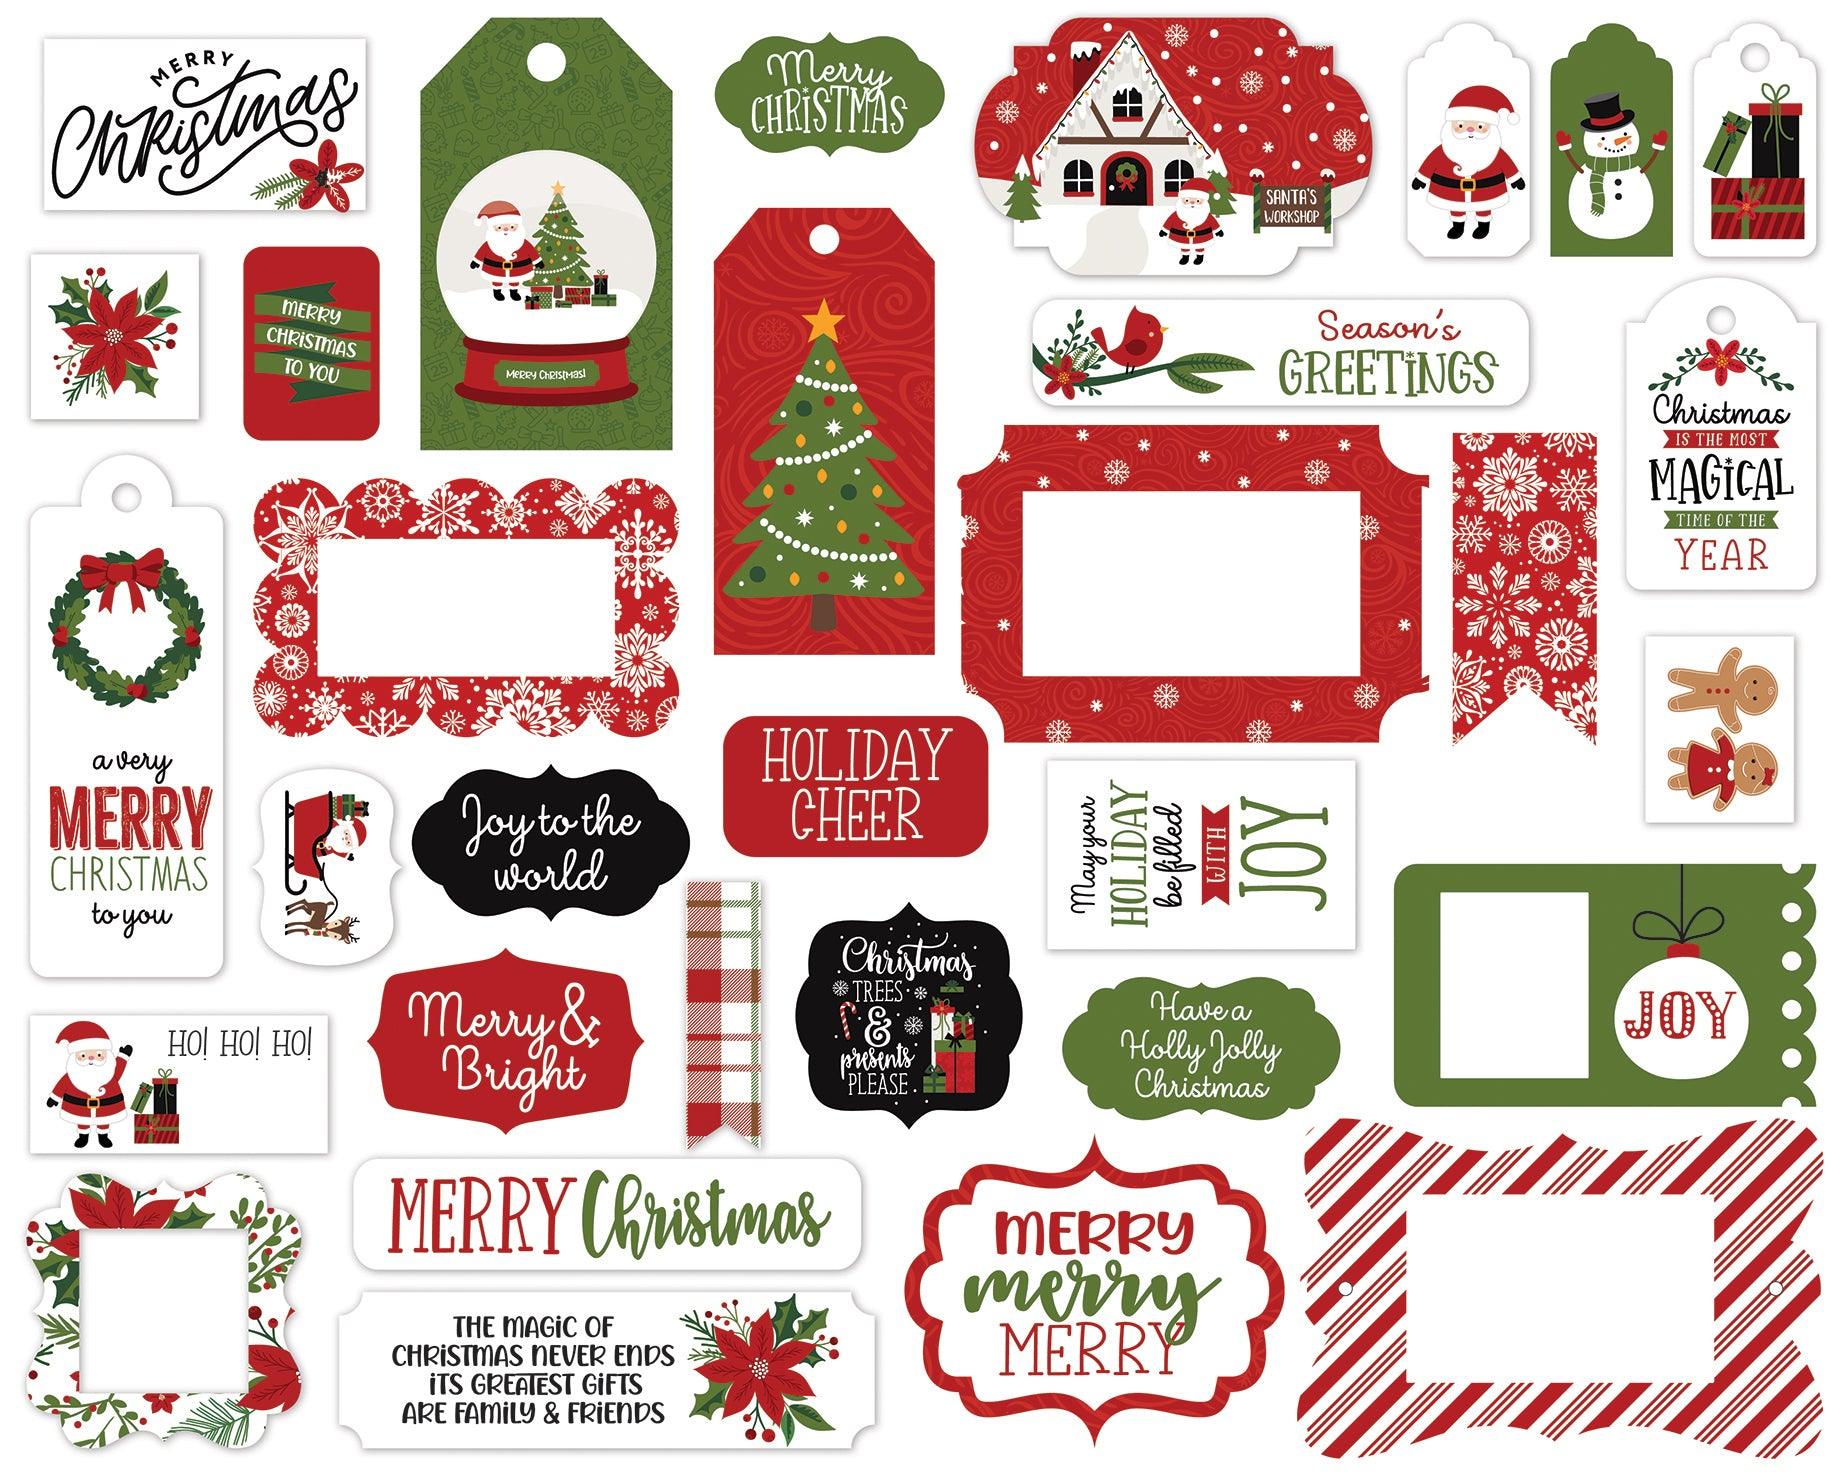 Christmas Magic Collection 5 x 5 Scrapbook Tags & Frames Die Cuts by Echo Park Paper - Scrapbook Supply Companies